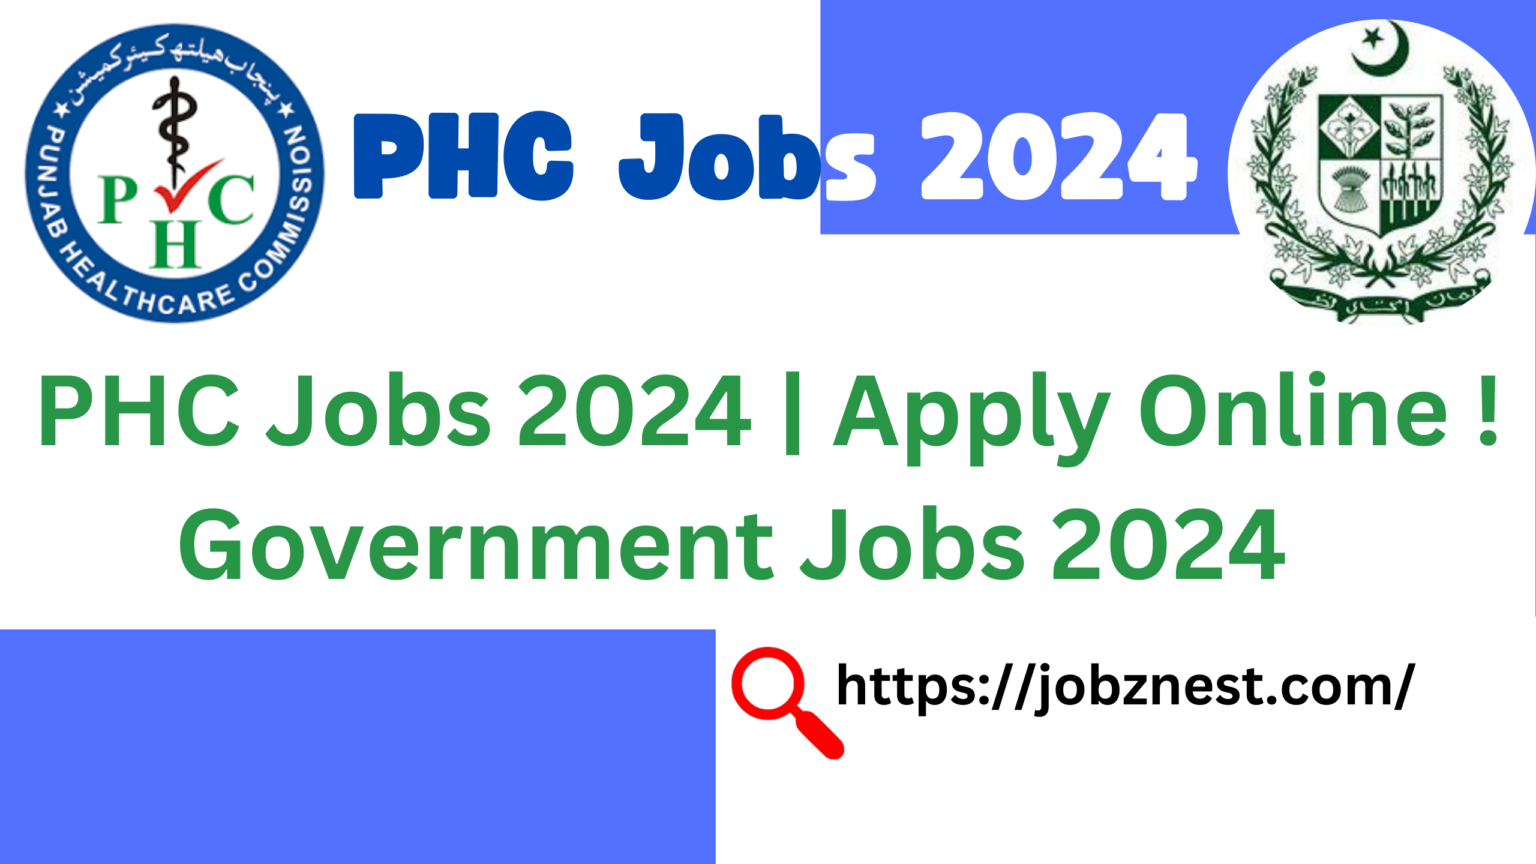 PHC Jobs 2024 | Government Jobs 2024 Apply Online !